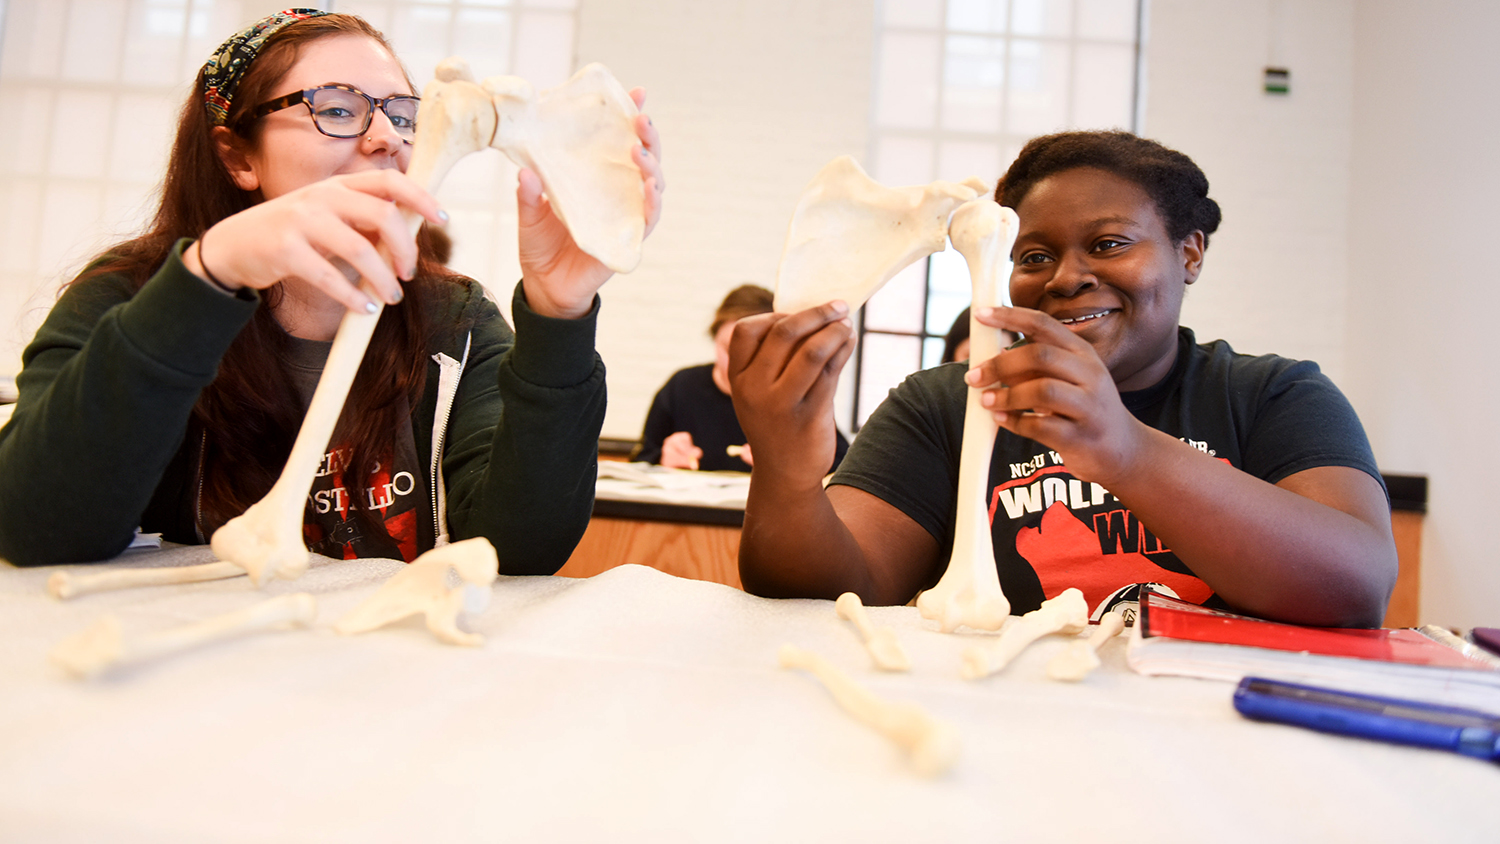 Students work on a project with bones during a paleontology class